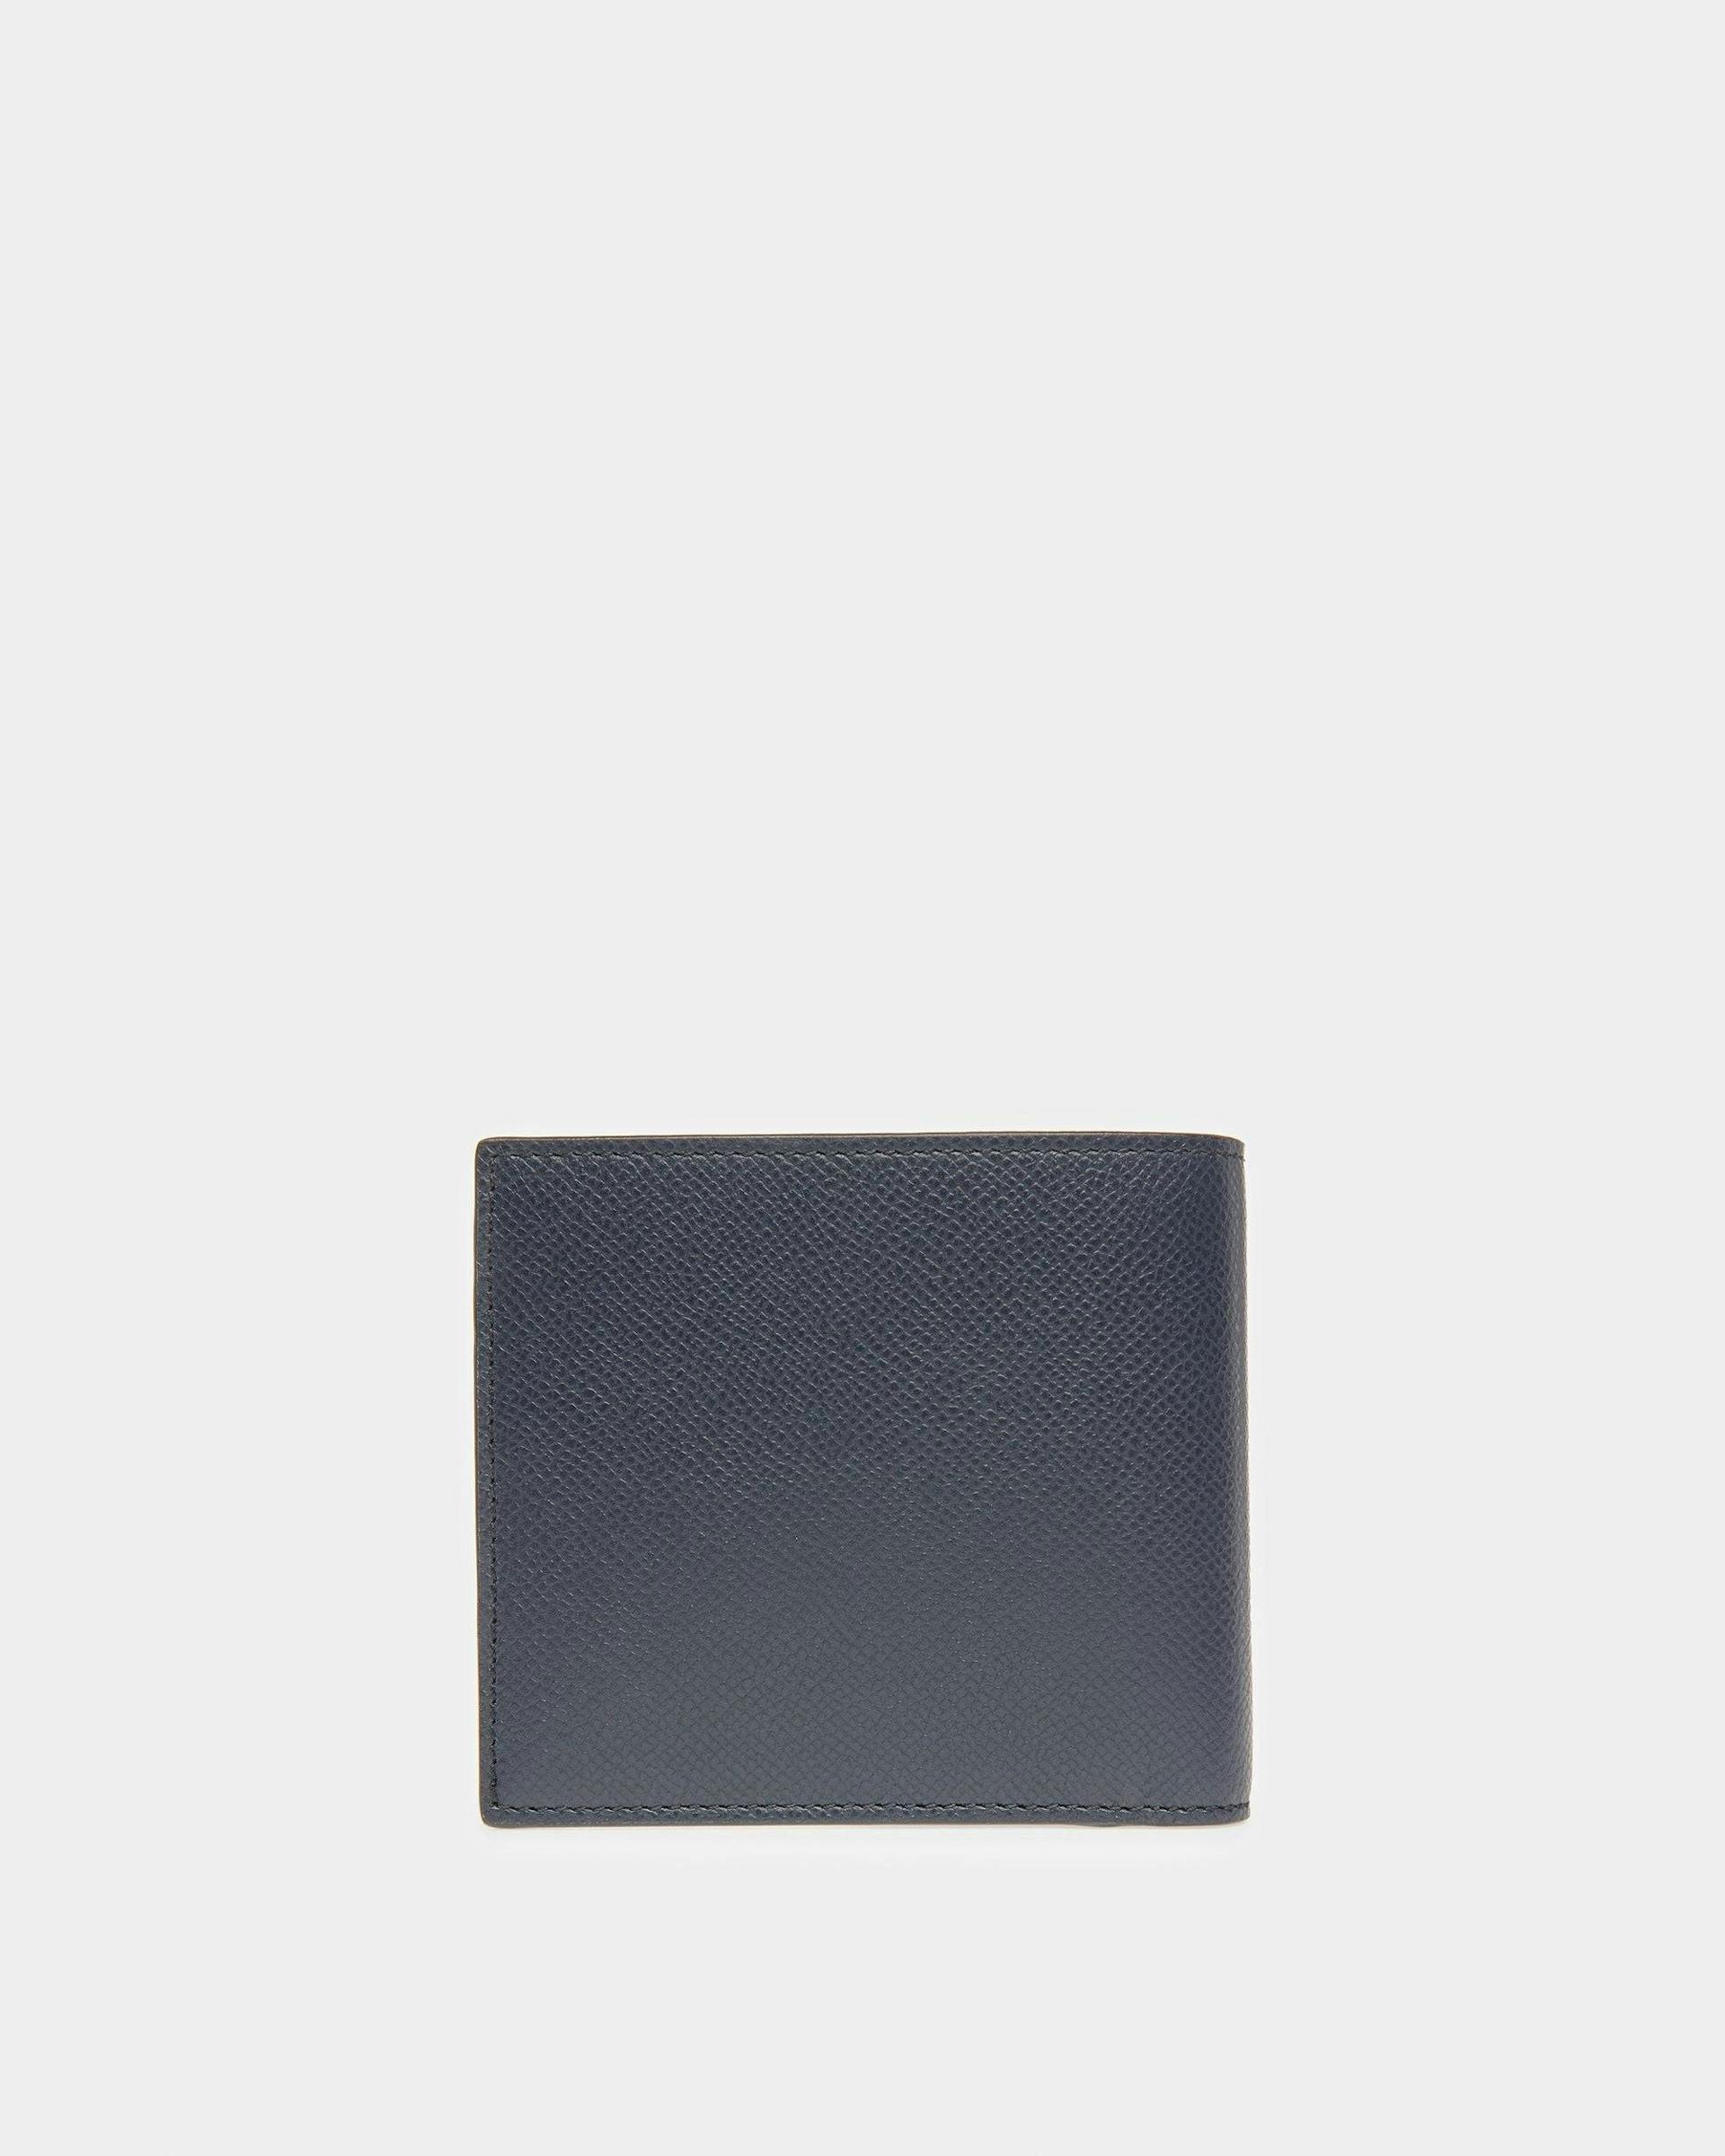 Brasai Leather Wallet In Midnight Blue And Light Blue - Men's - Bally - 02